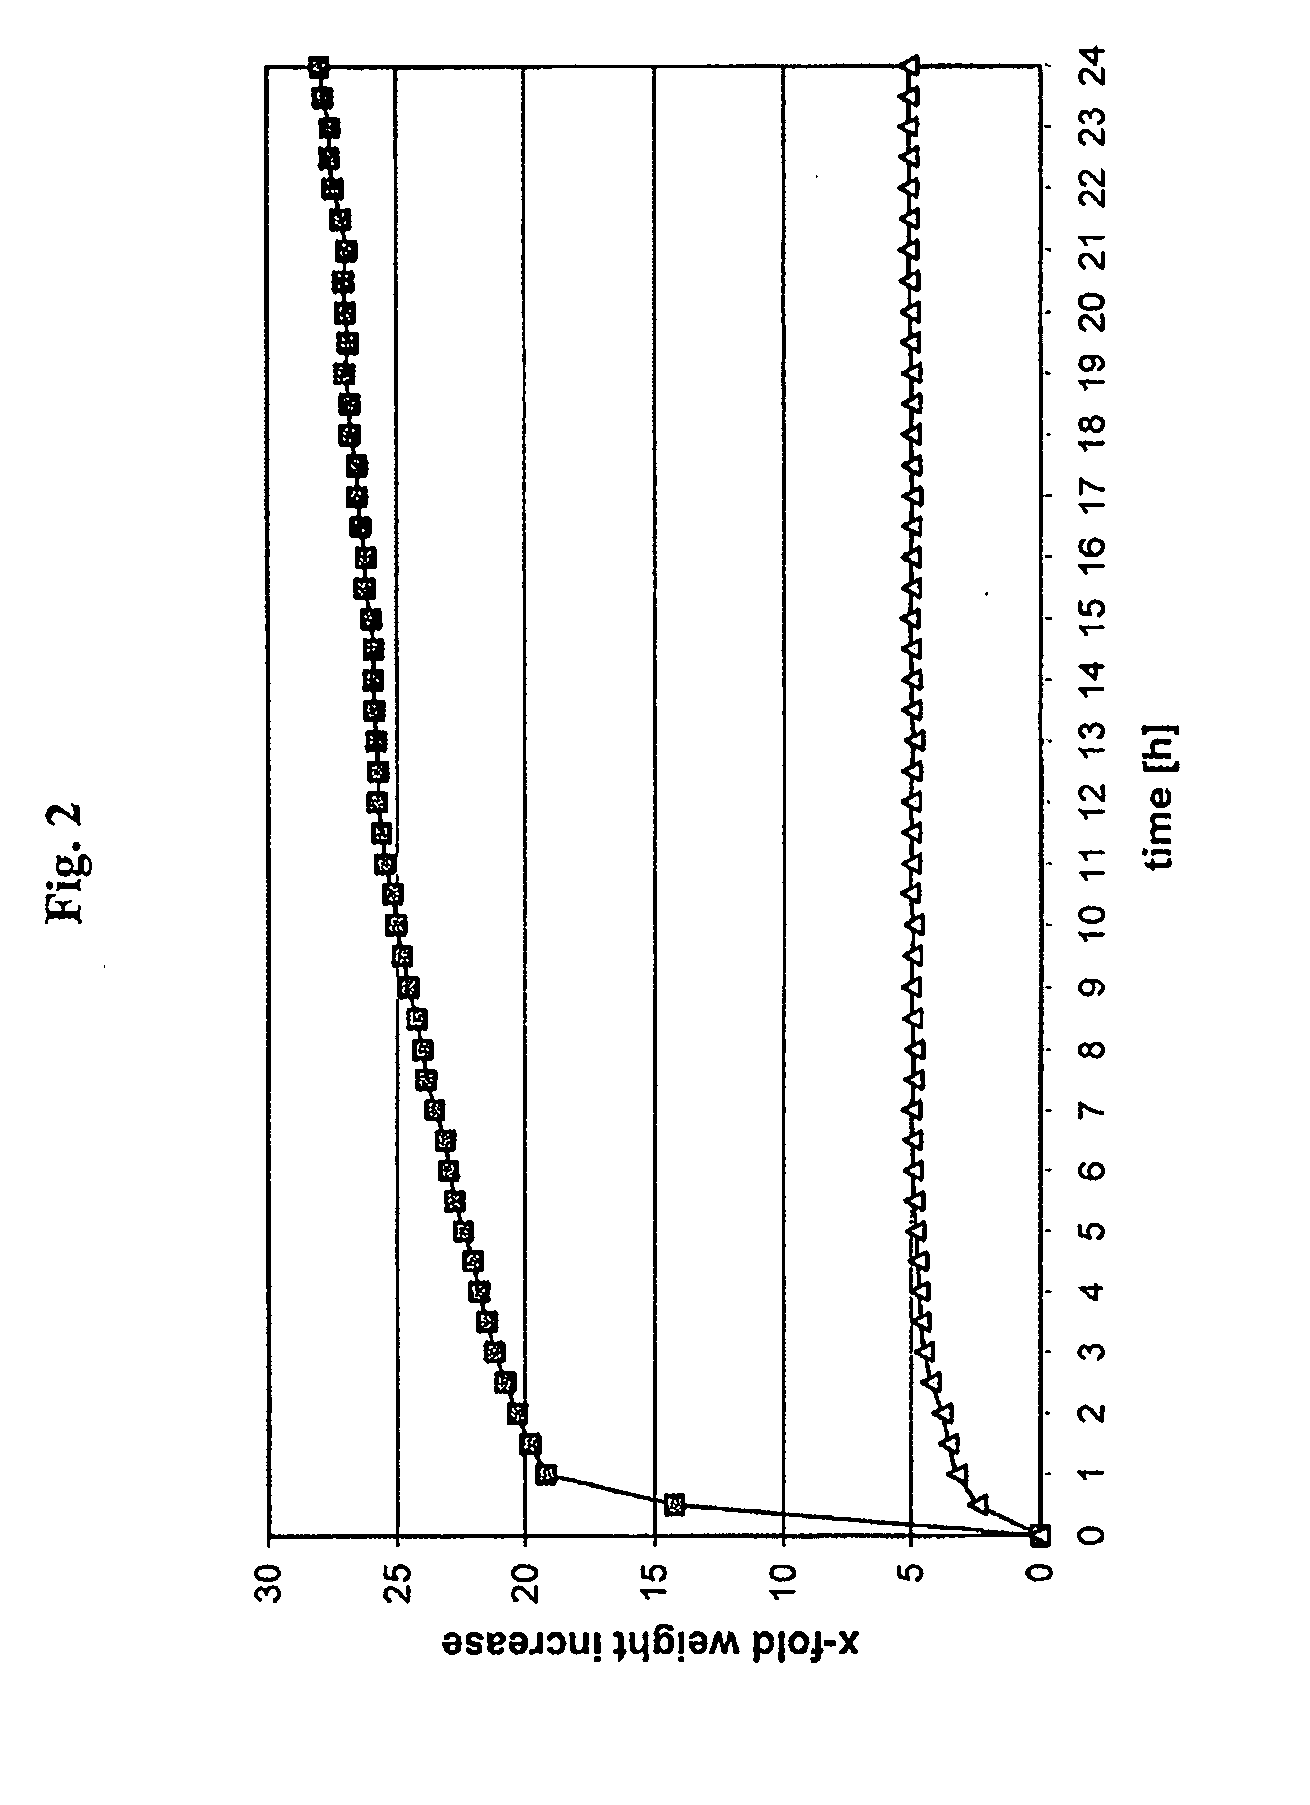 Water-swellable hybrid material with inorganic additives and method of Producing same